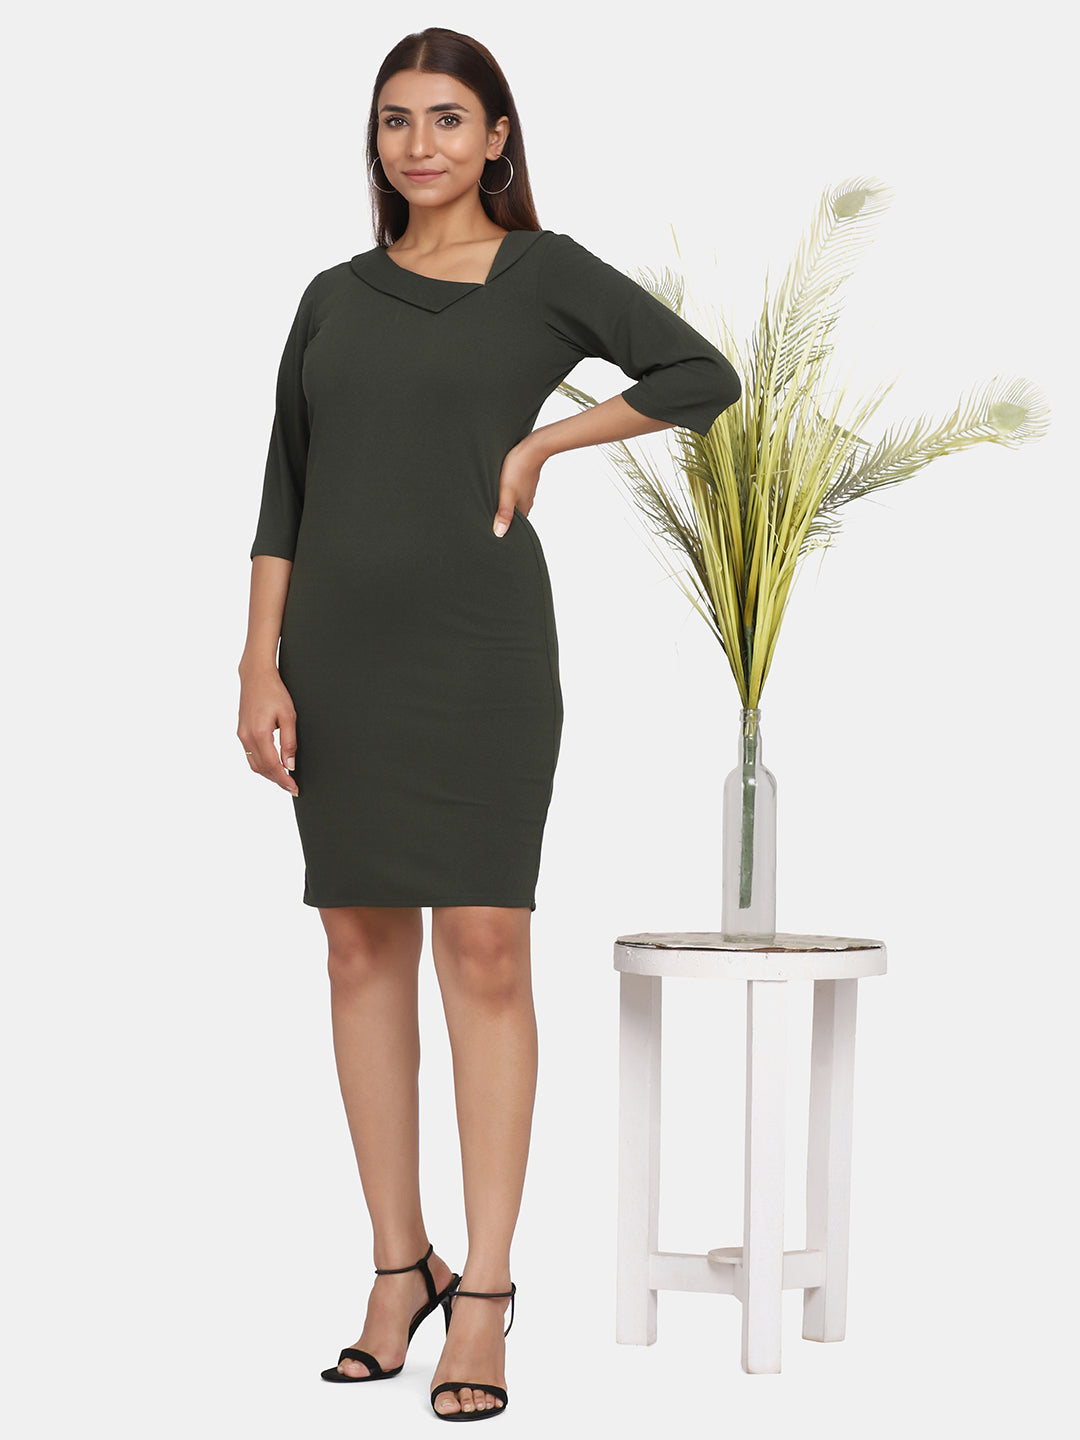 Stretch Evening Dress for Women - Olive Green